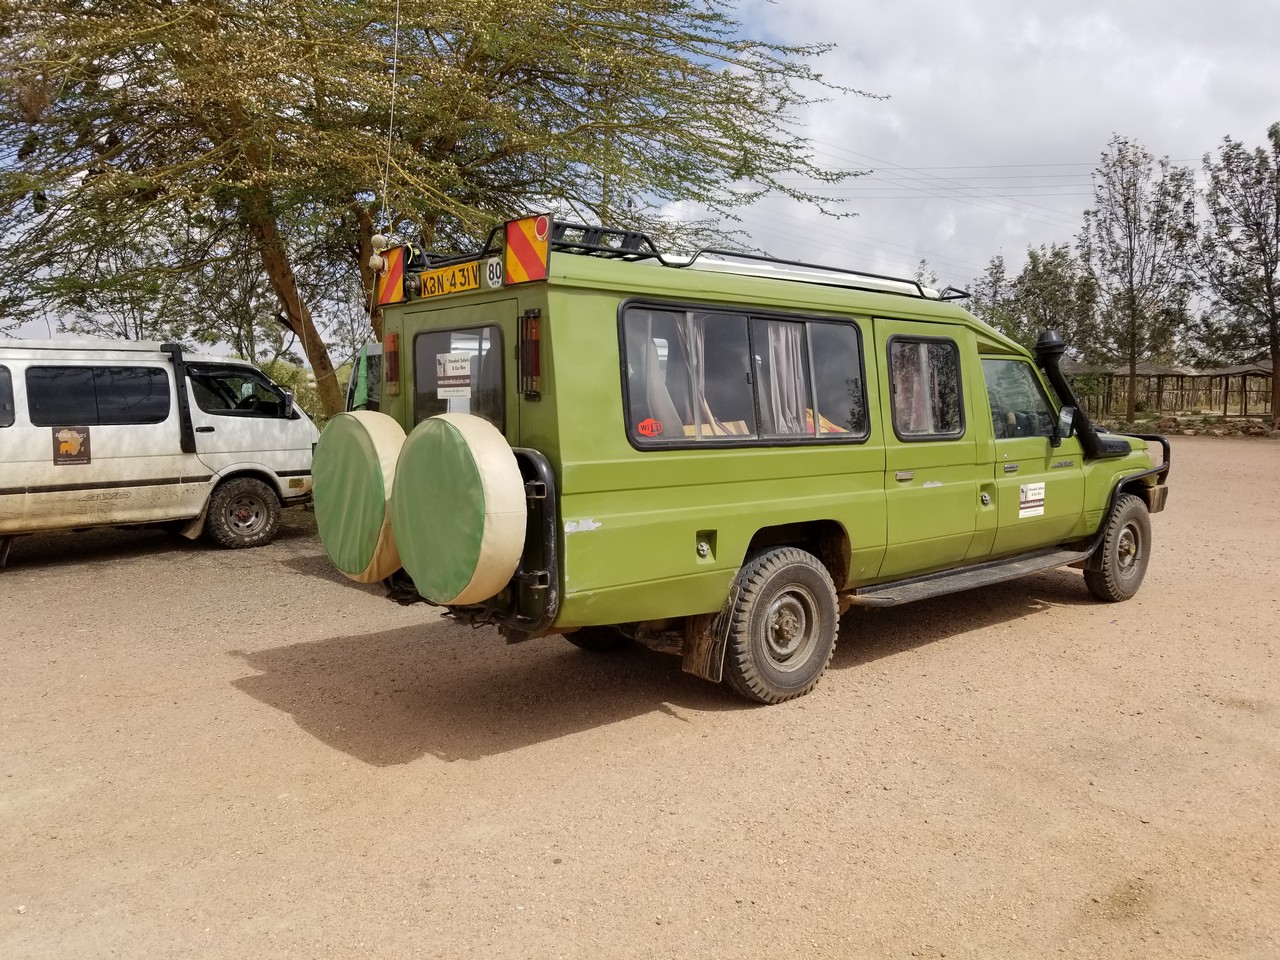 a green van with two spare tires on the back